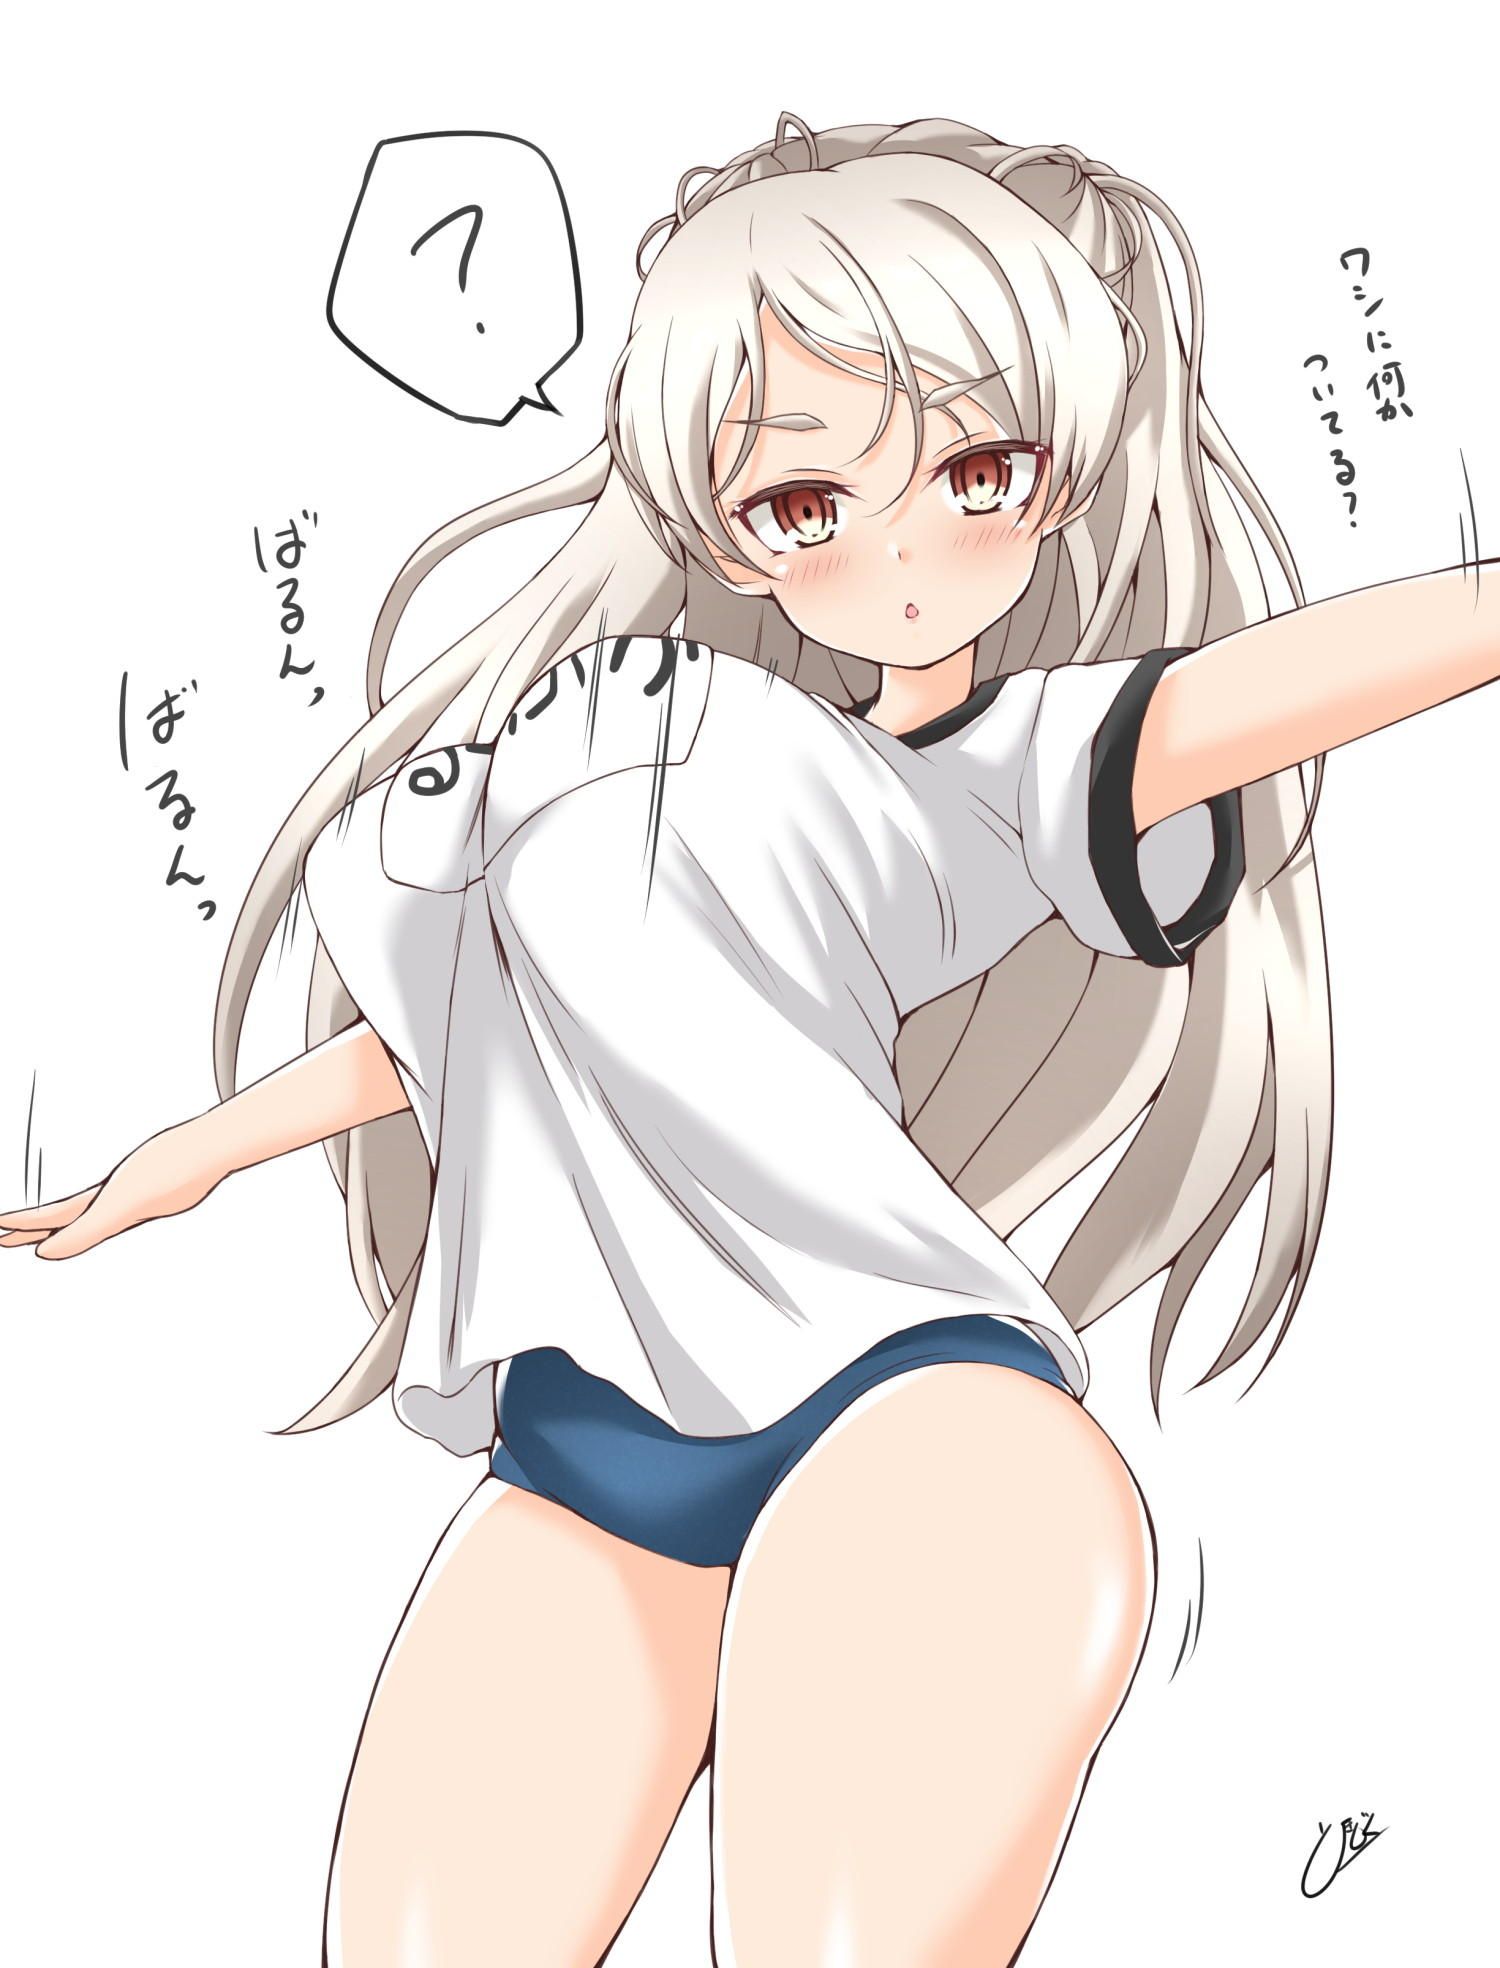 It's grown too much and doesn't fit the size?! Image of a girl ♪ in bloomers + gym clothes with snappy breasts and buttocks 32